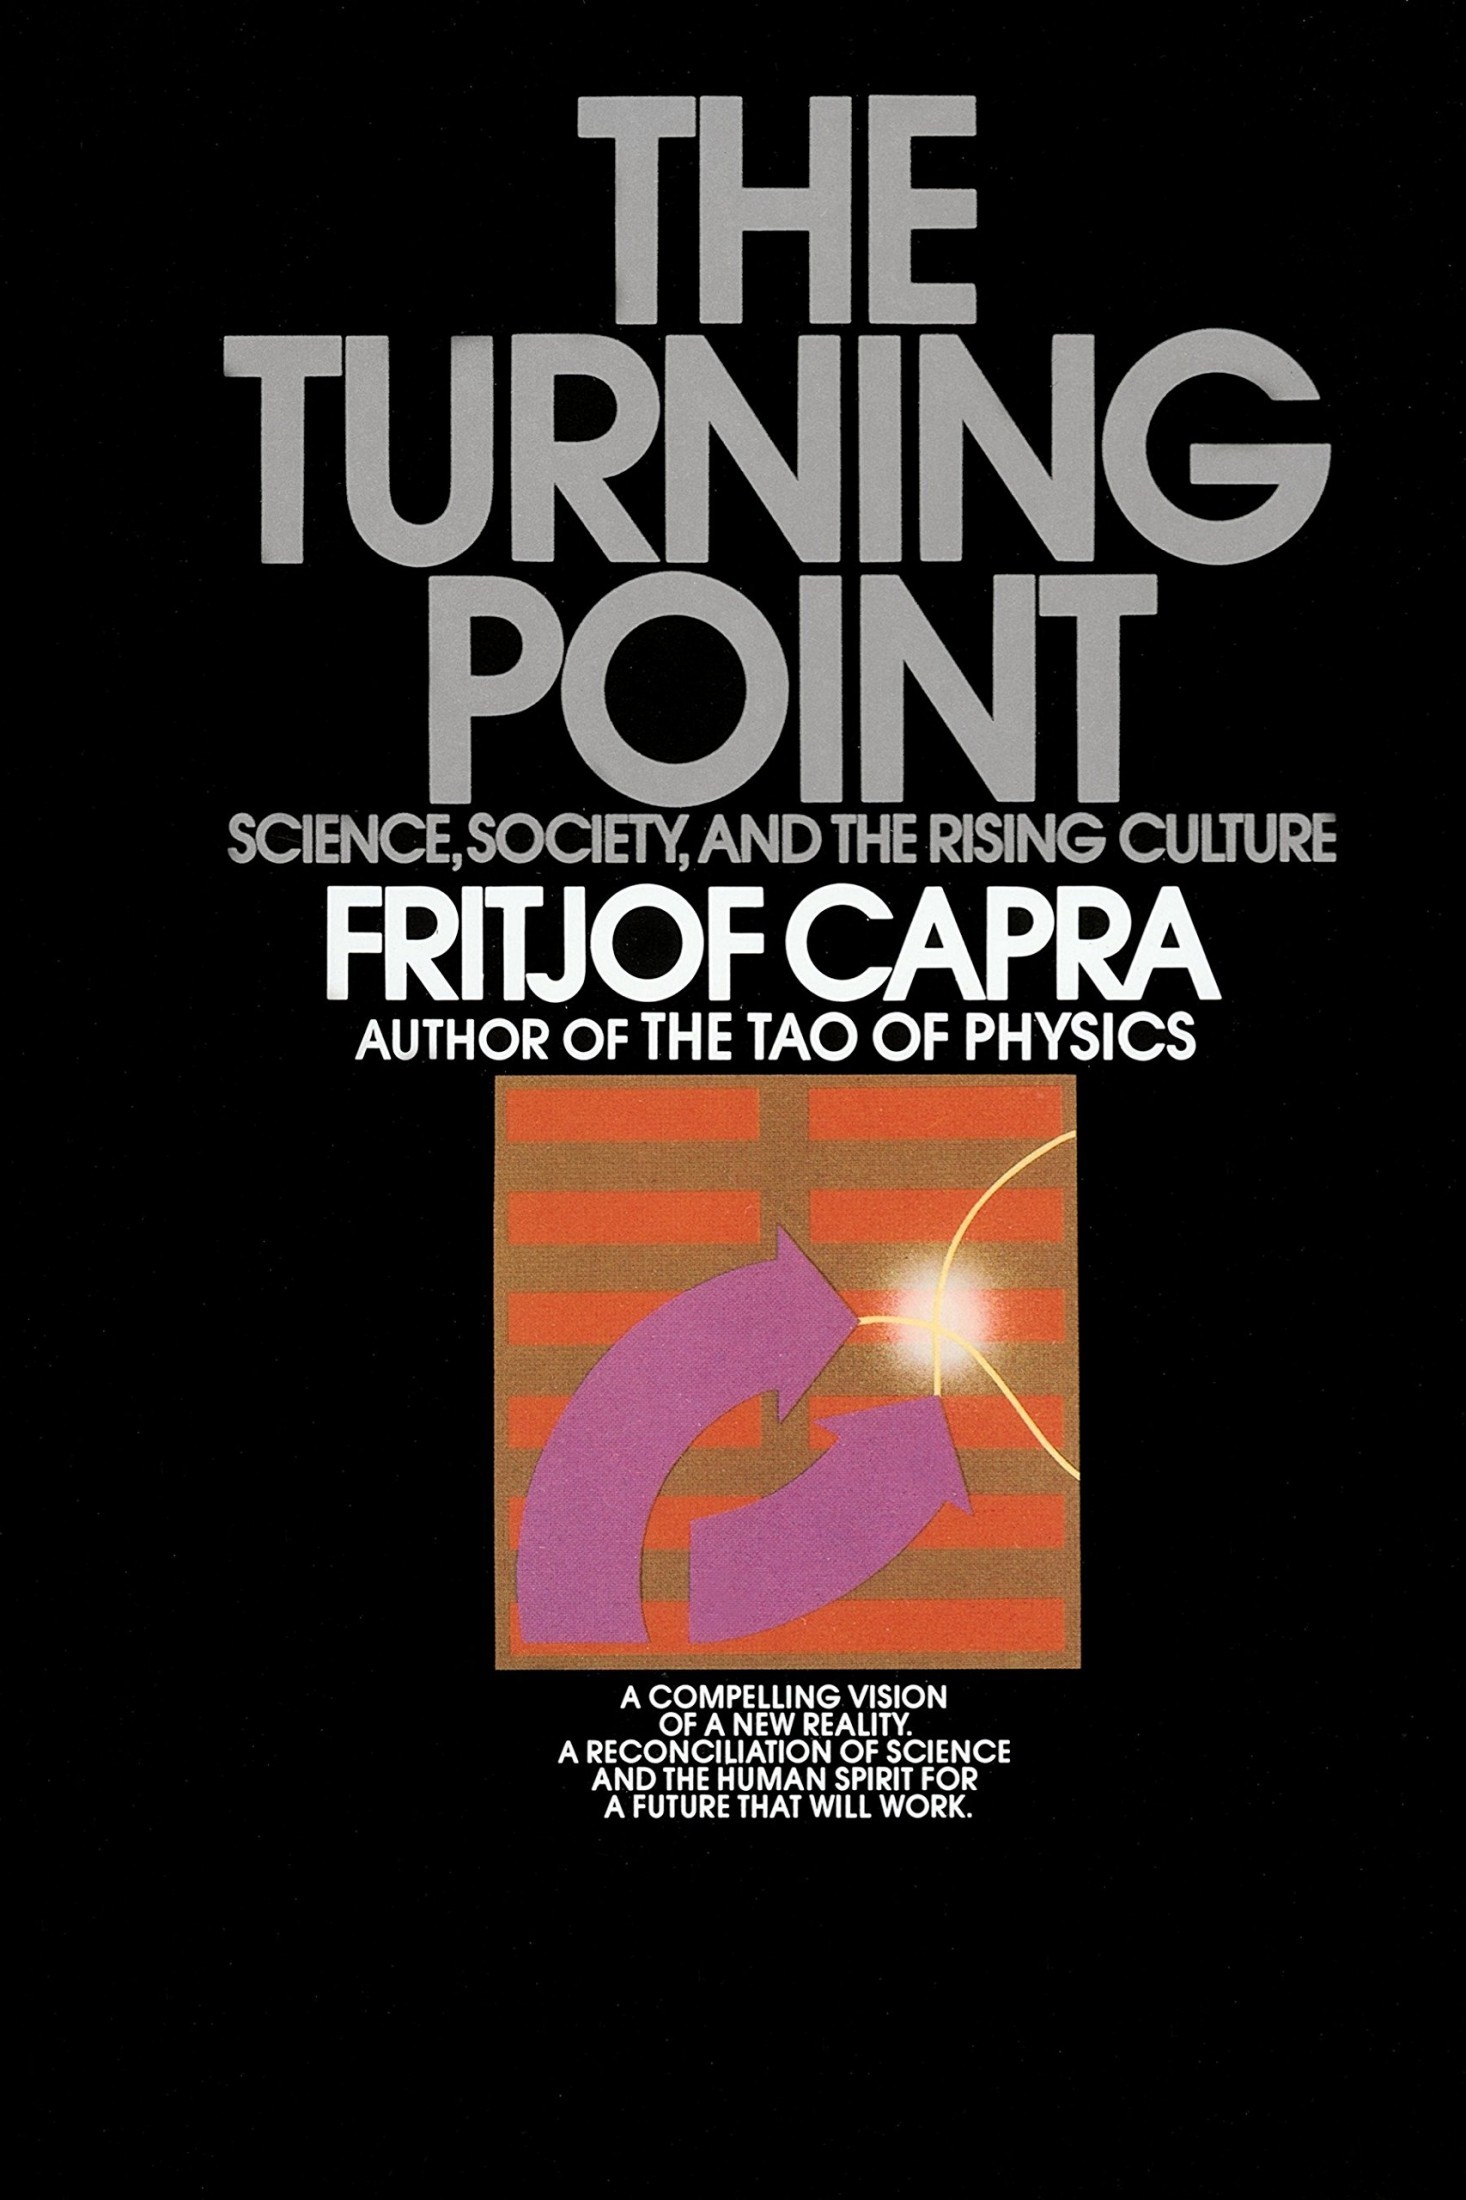 The Turning Point: Science, Society, and the Rising Culture